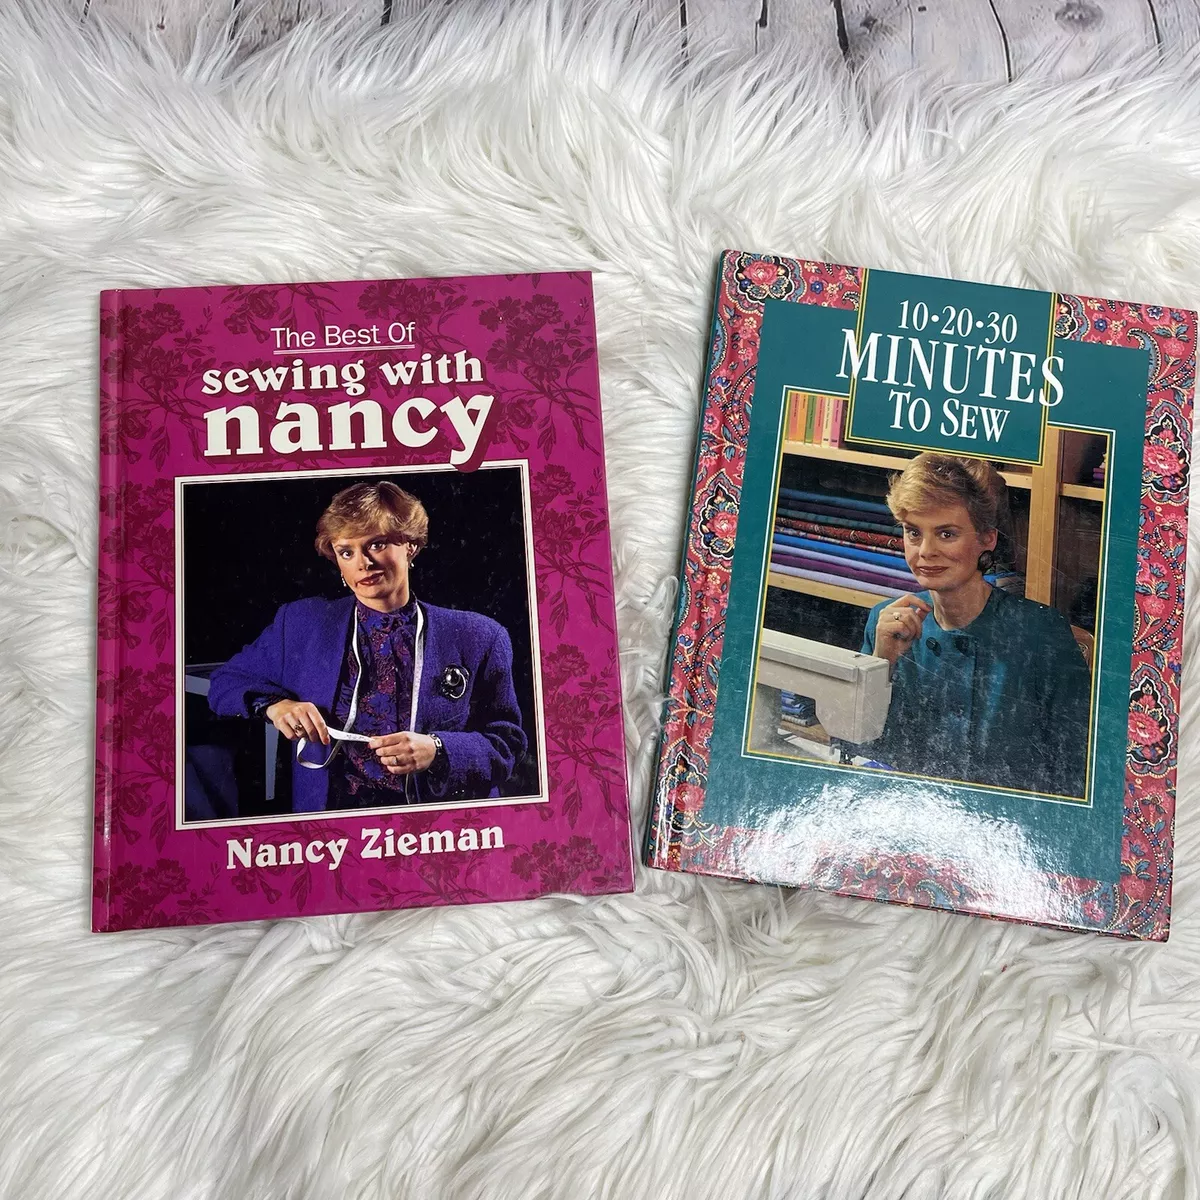 Sewing Books Lot, The Best Of Sewing With Nancy, 10 20 30 minutes To Sew